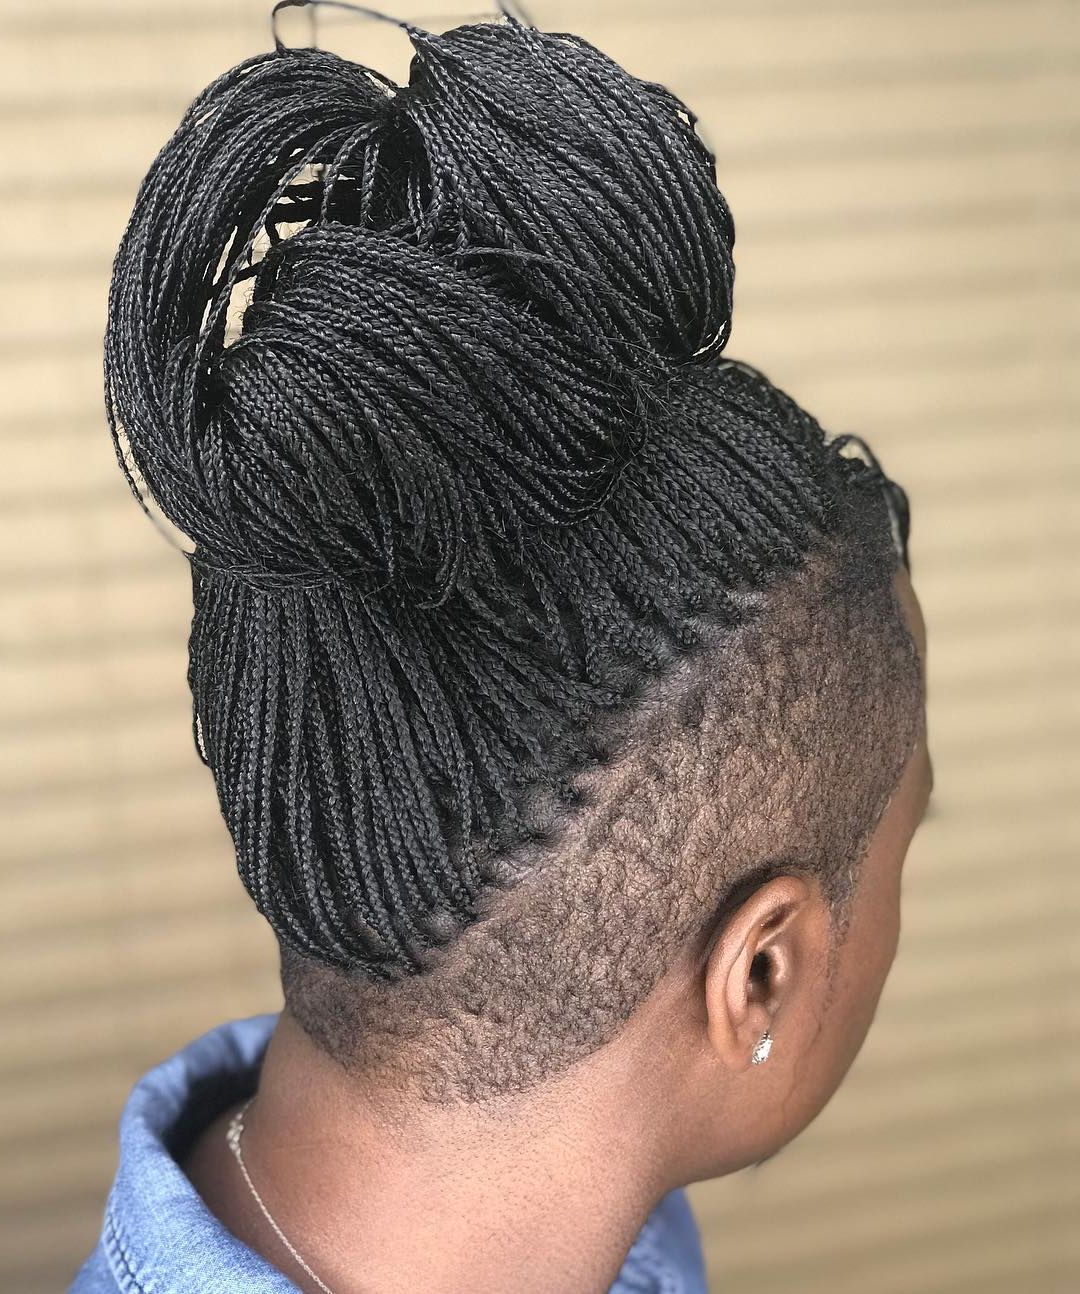 20 Superb Braids With Shaved Sides Worth Copying Within Most Recently Released Side Swept Yarn Twists Hairstyles (View 9 of 20)